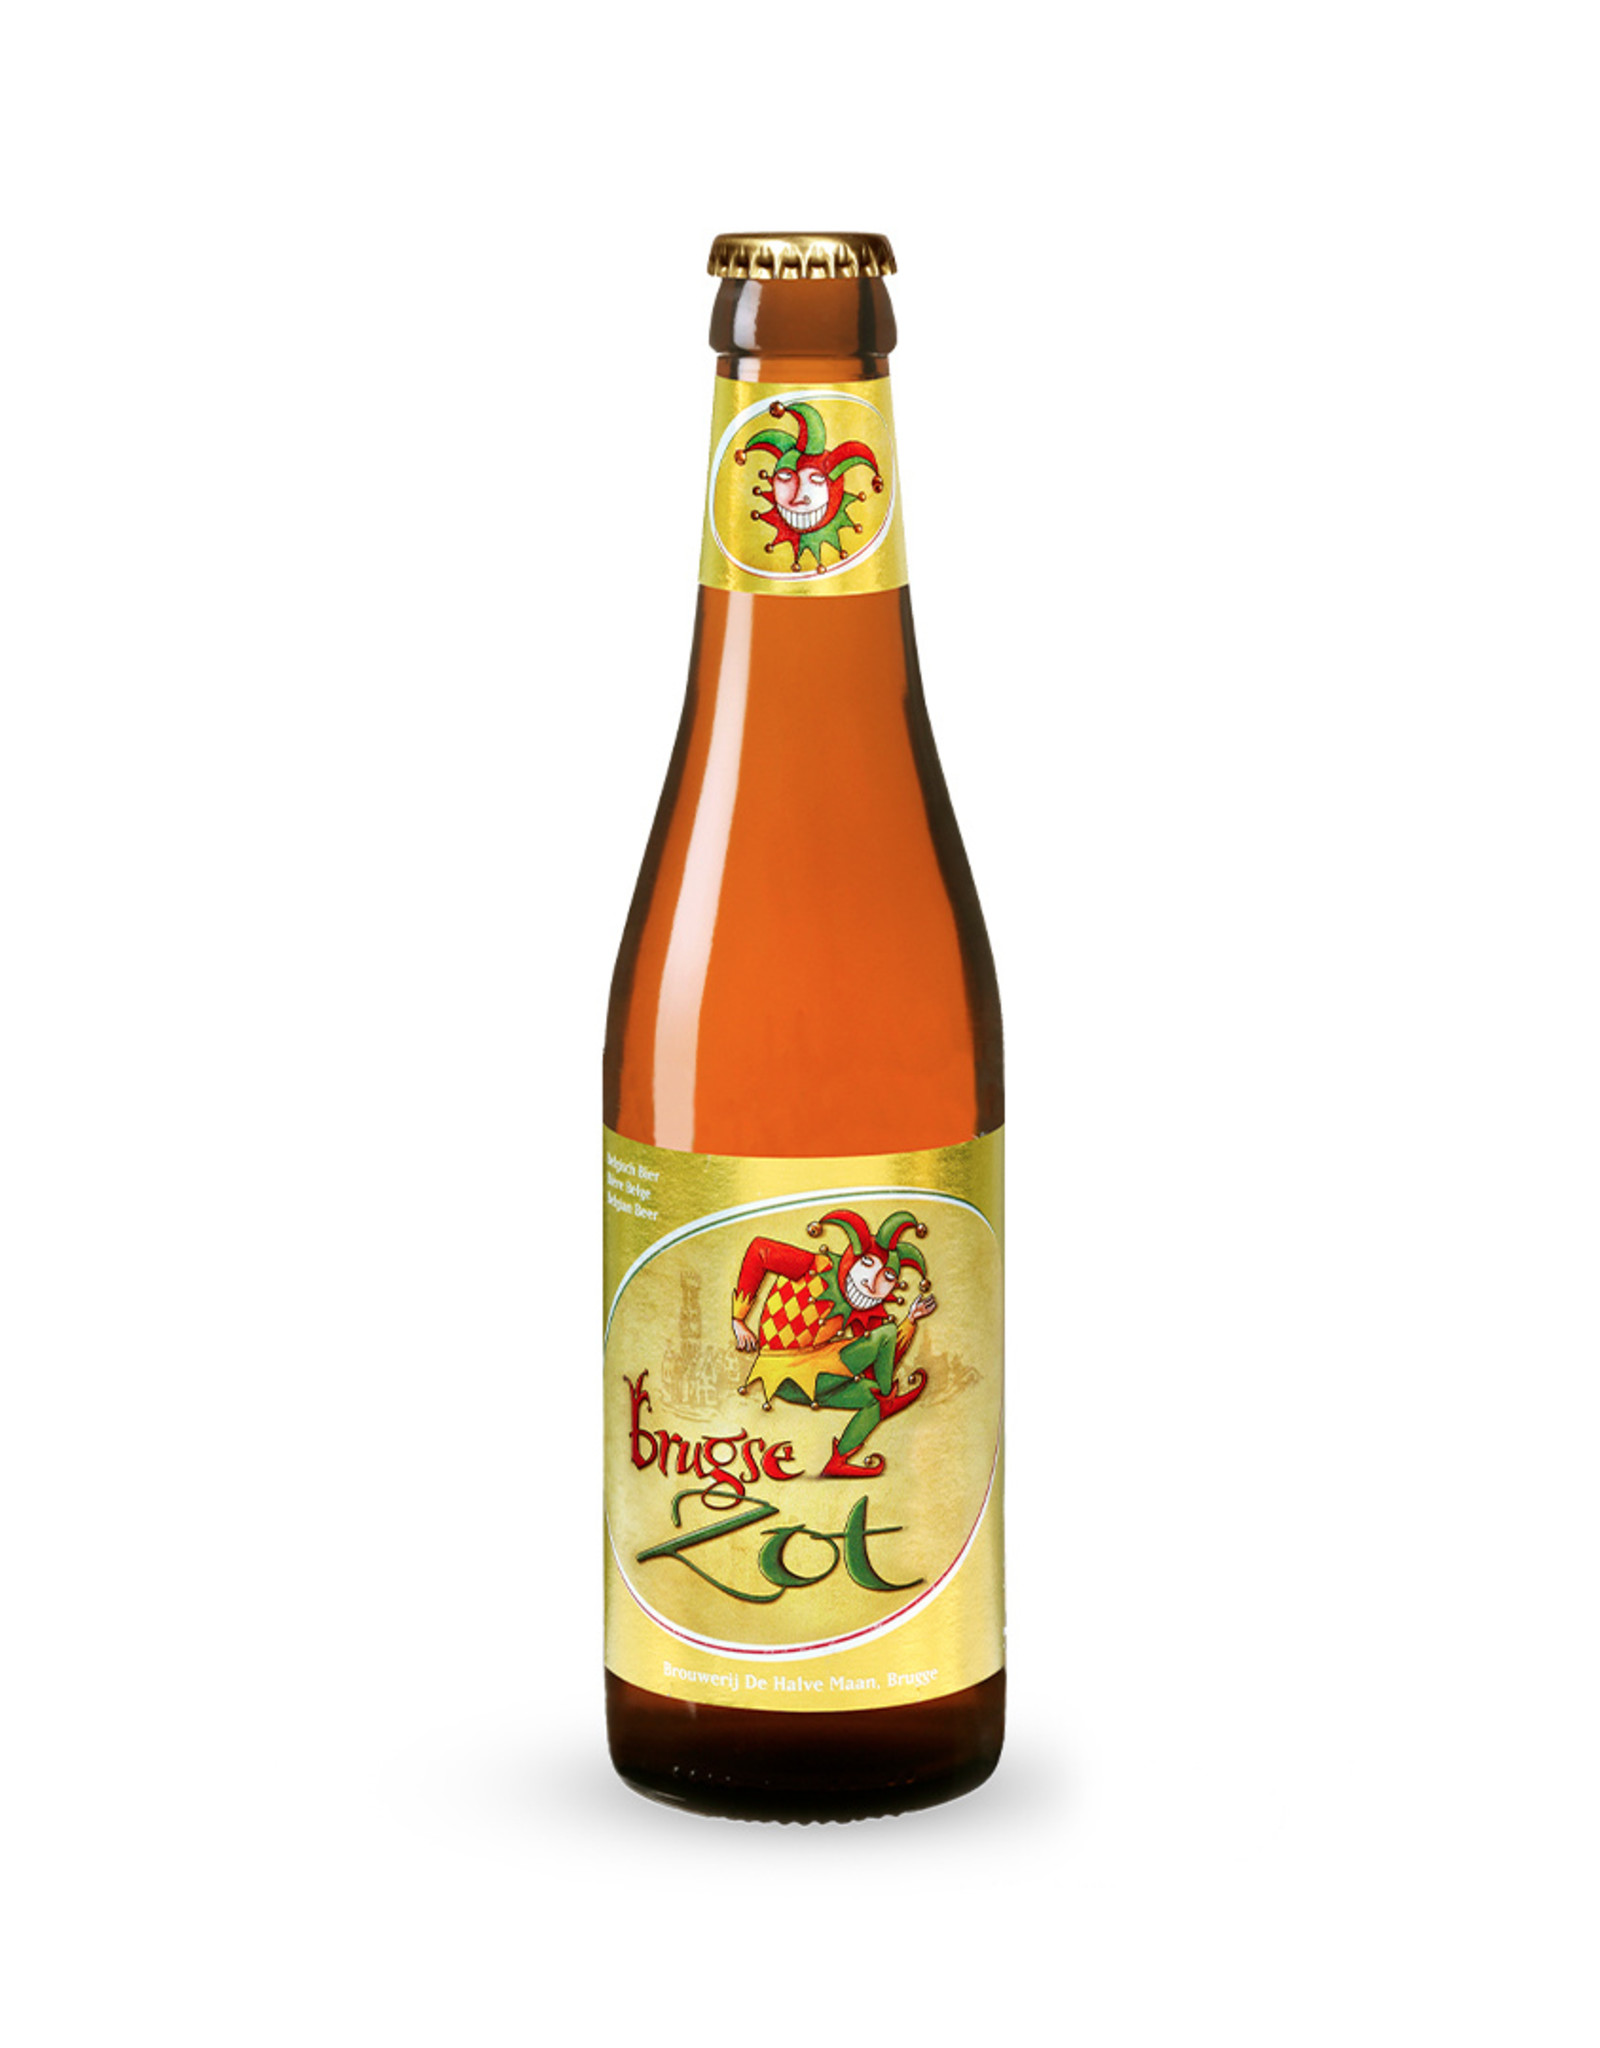 Brugse Zot Brugse Zot Blond bouteille 33 cl